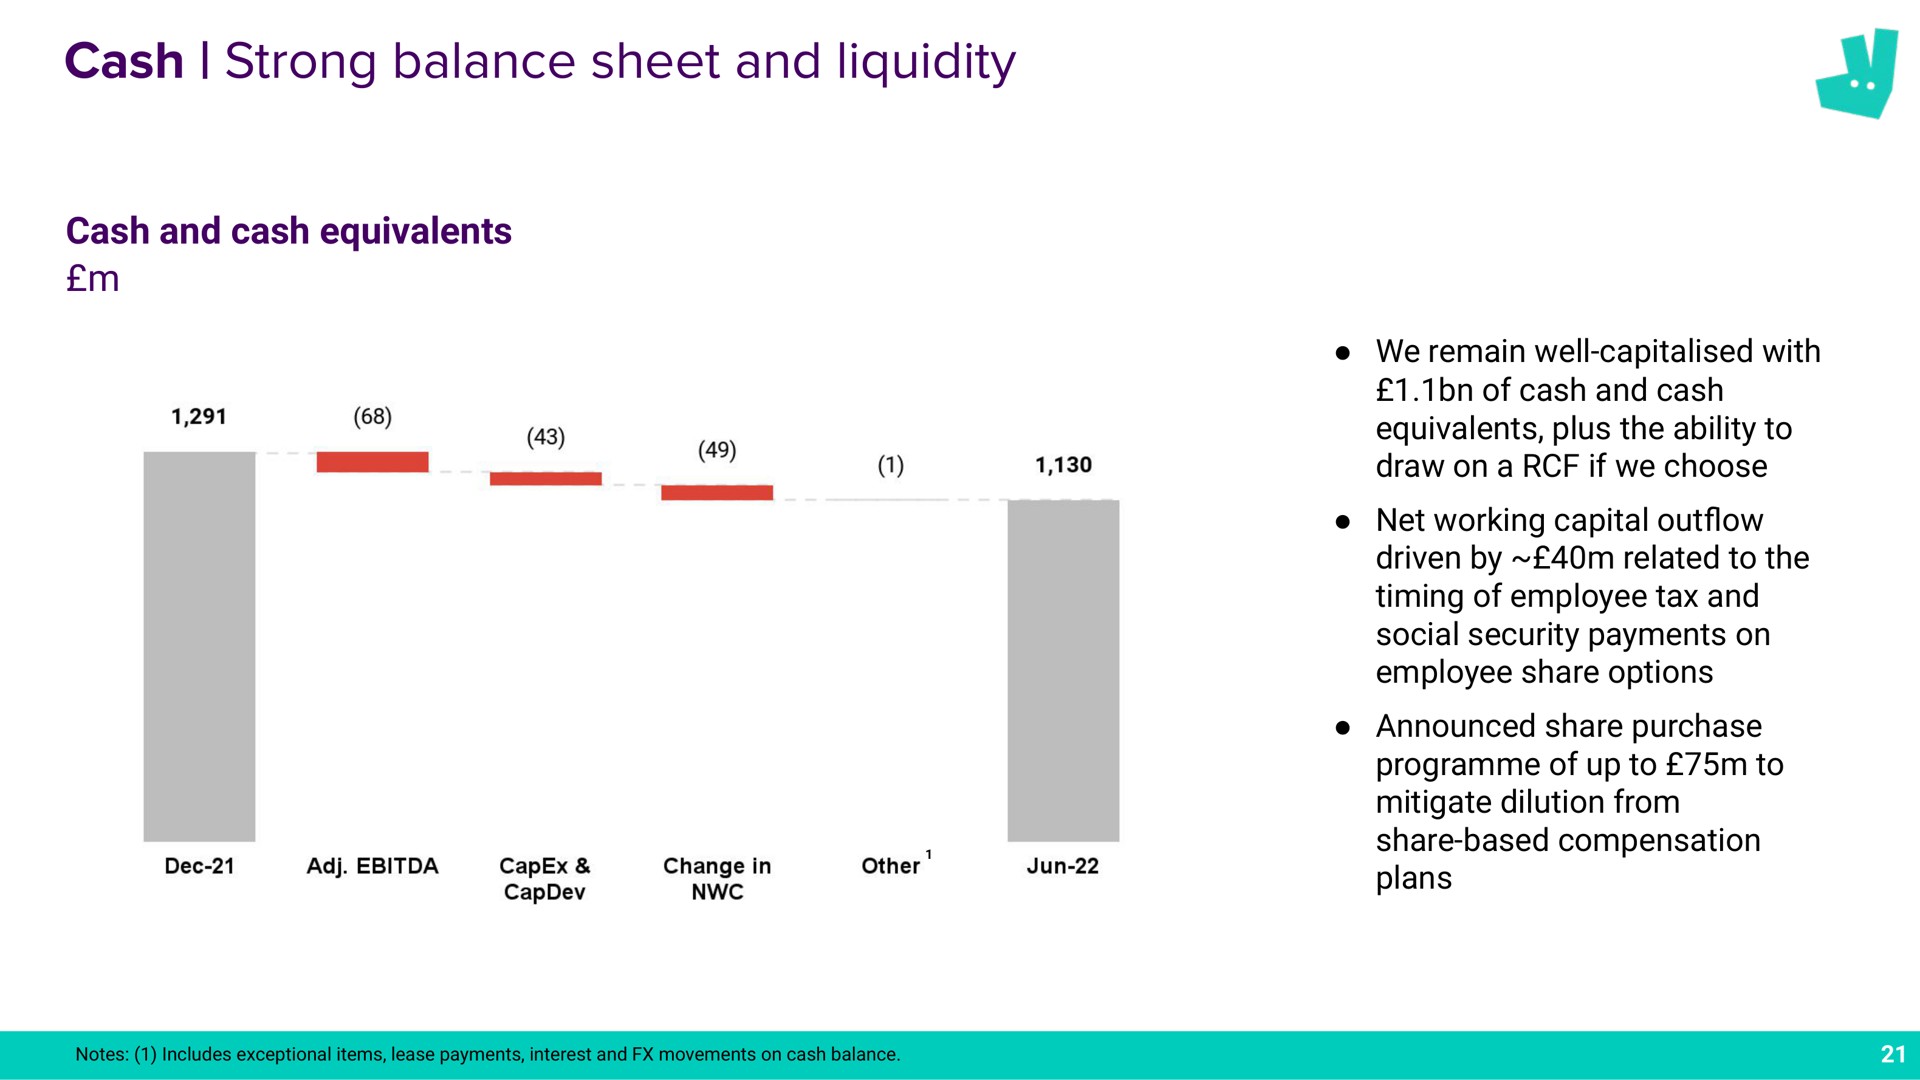 cash strong balance sheet and liquidity a | Deliveroo